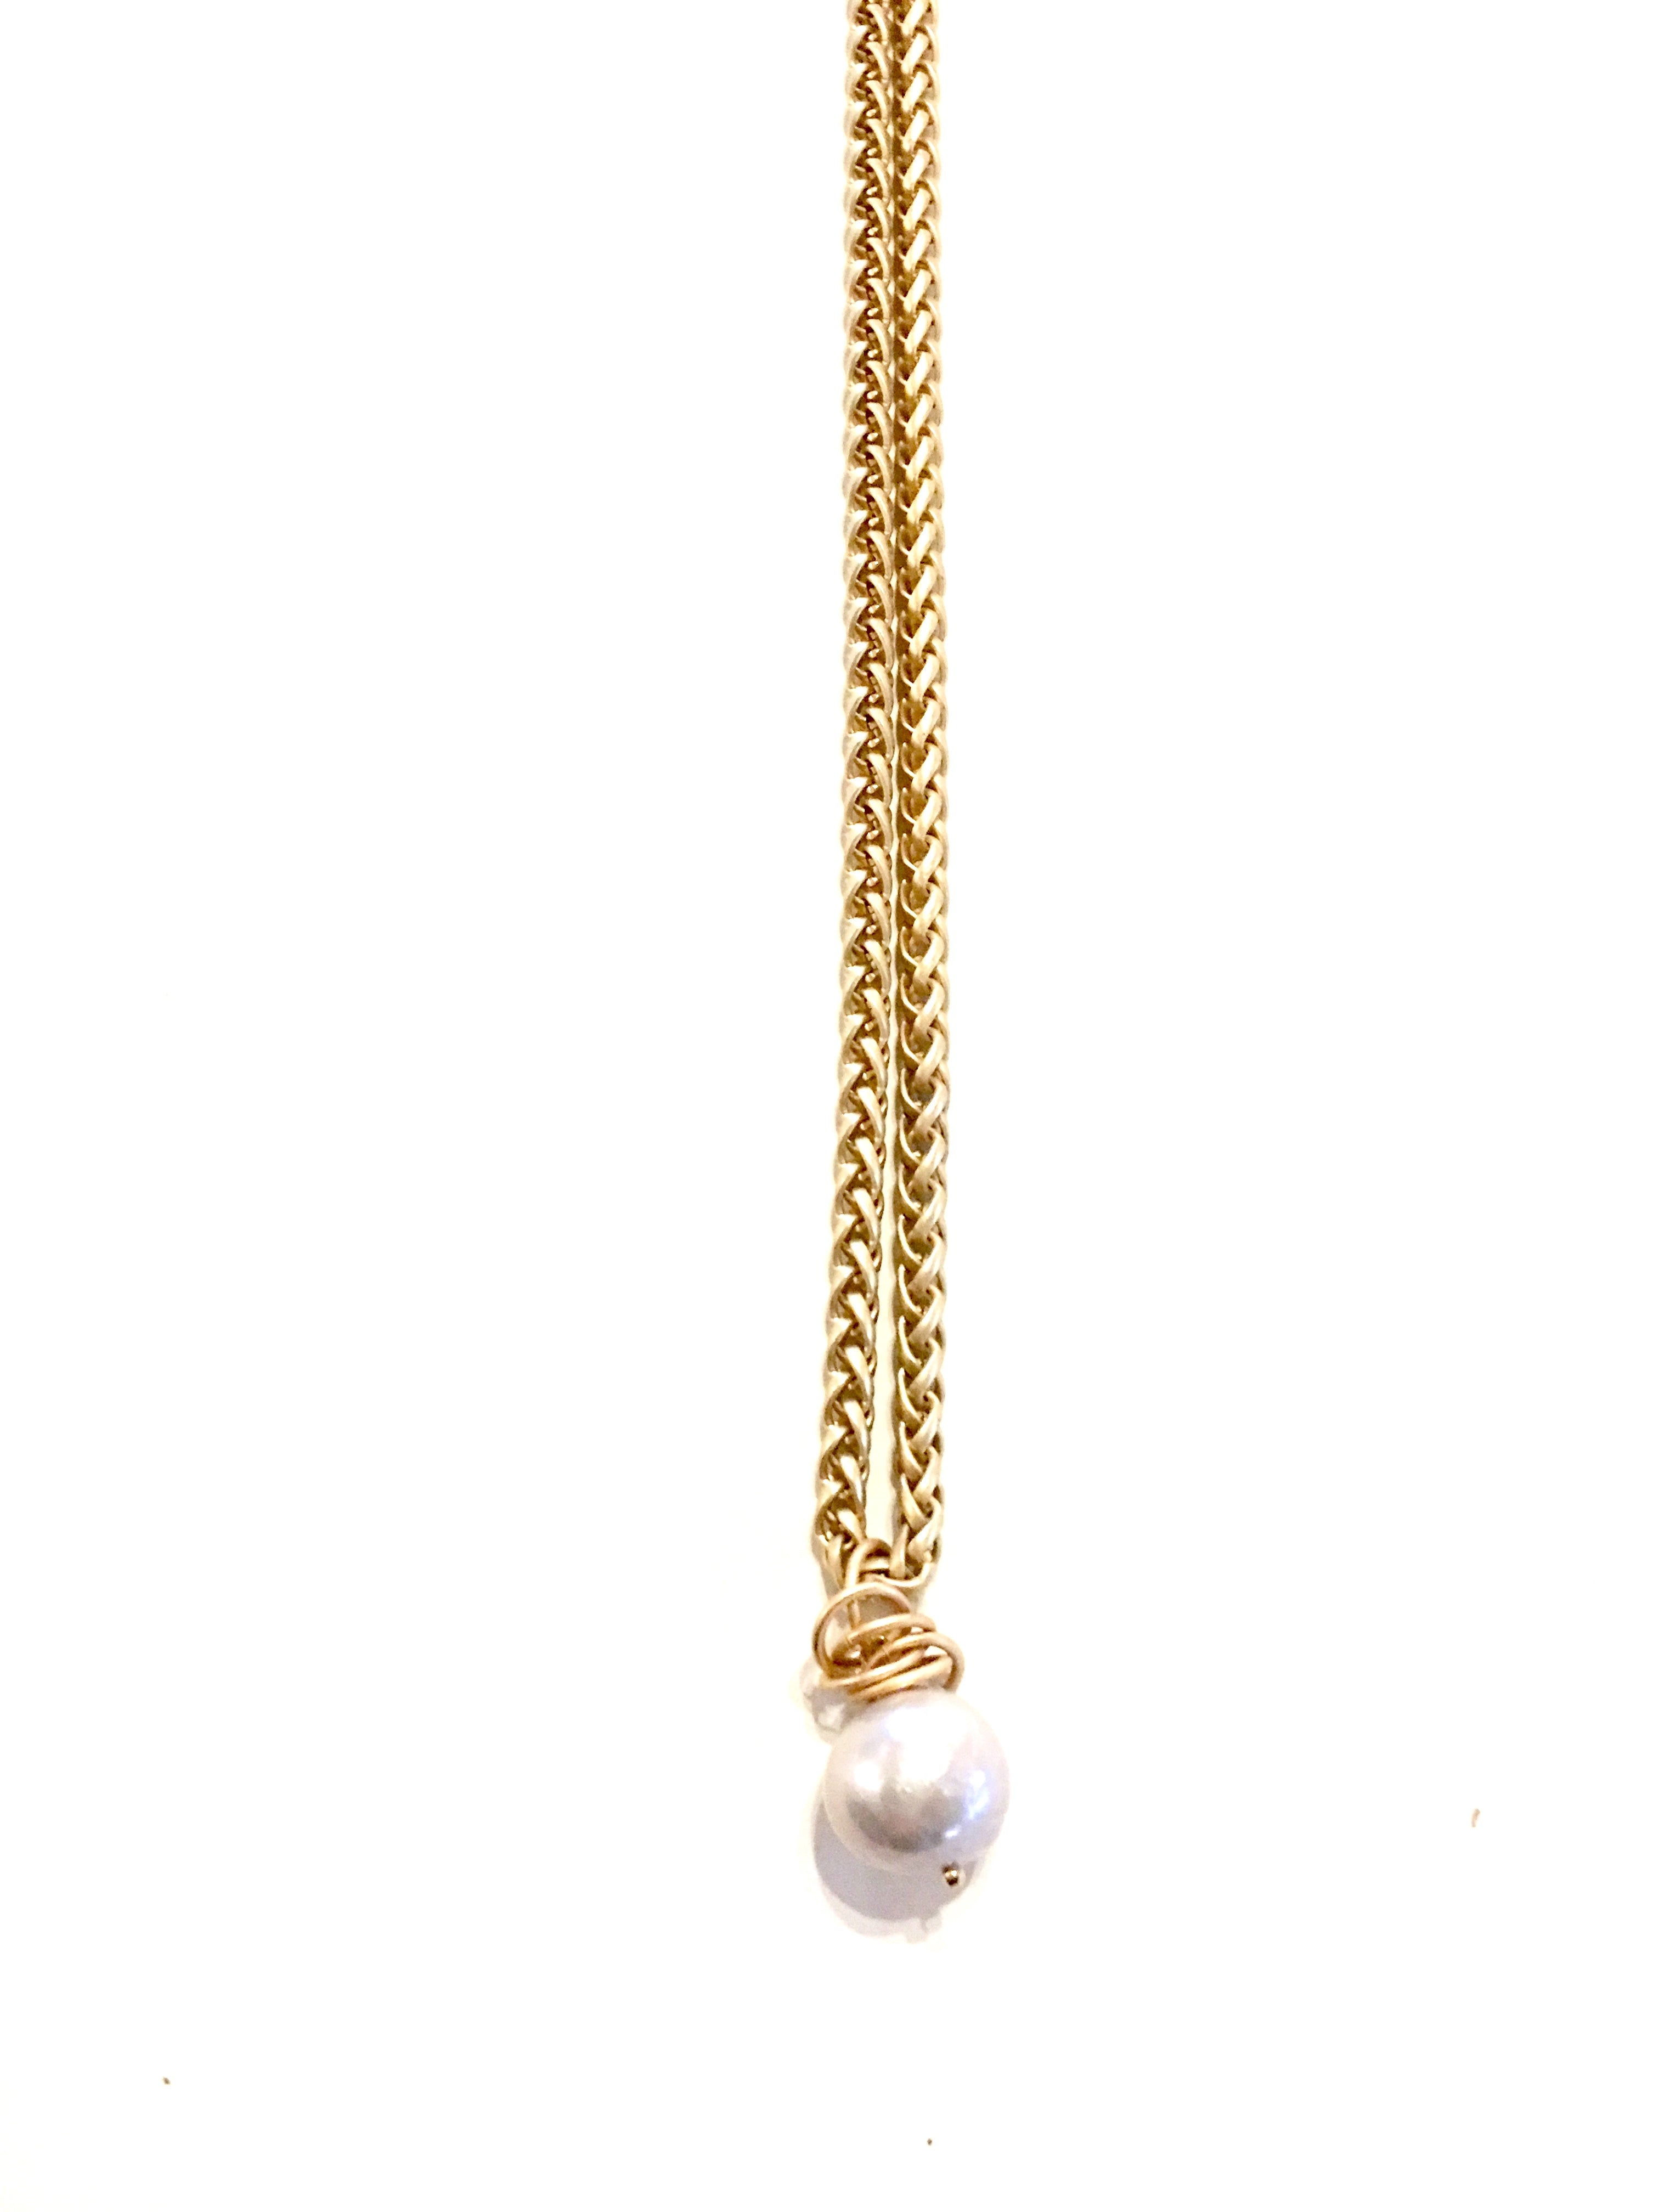 Pamela - necklace with wire-wrapped Edison pearl